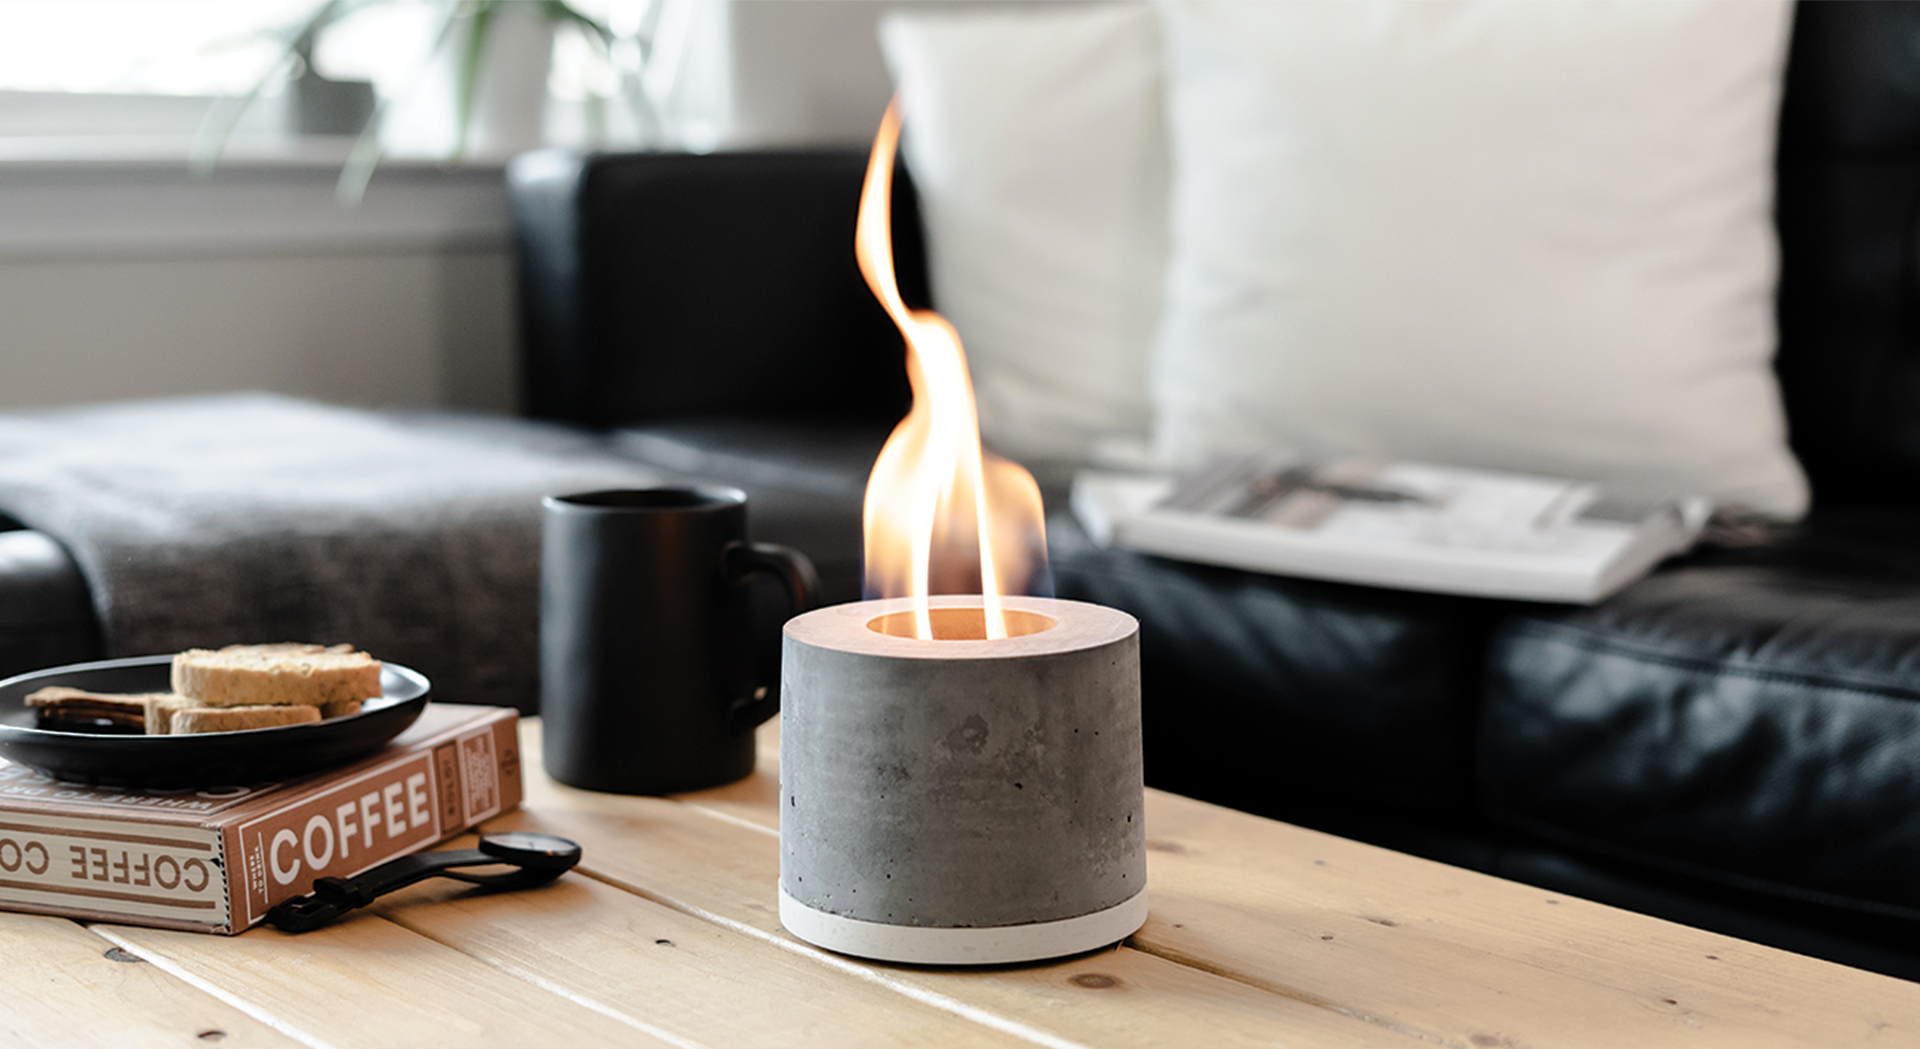 Flikr Fire - Round Personal Fireplace with Lid